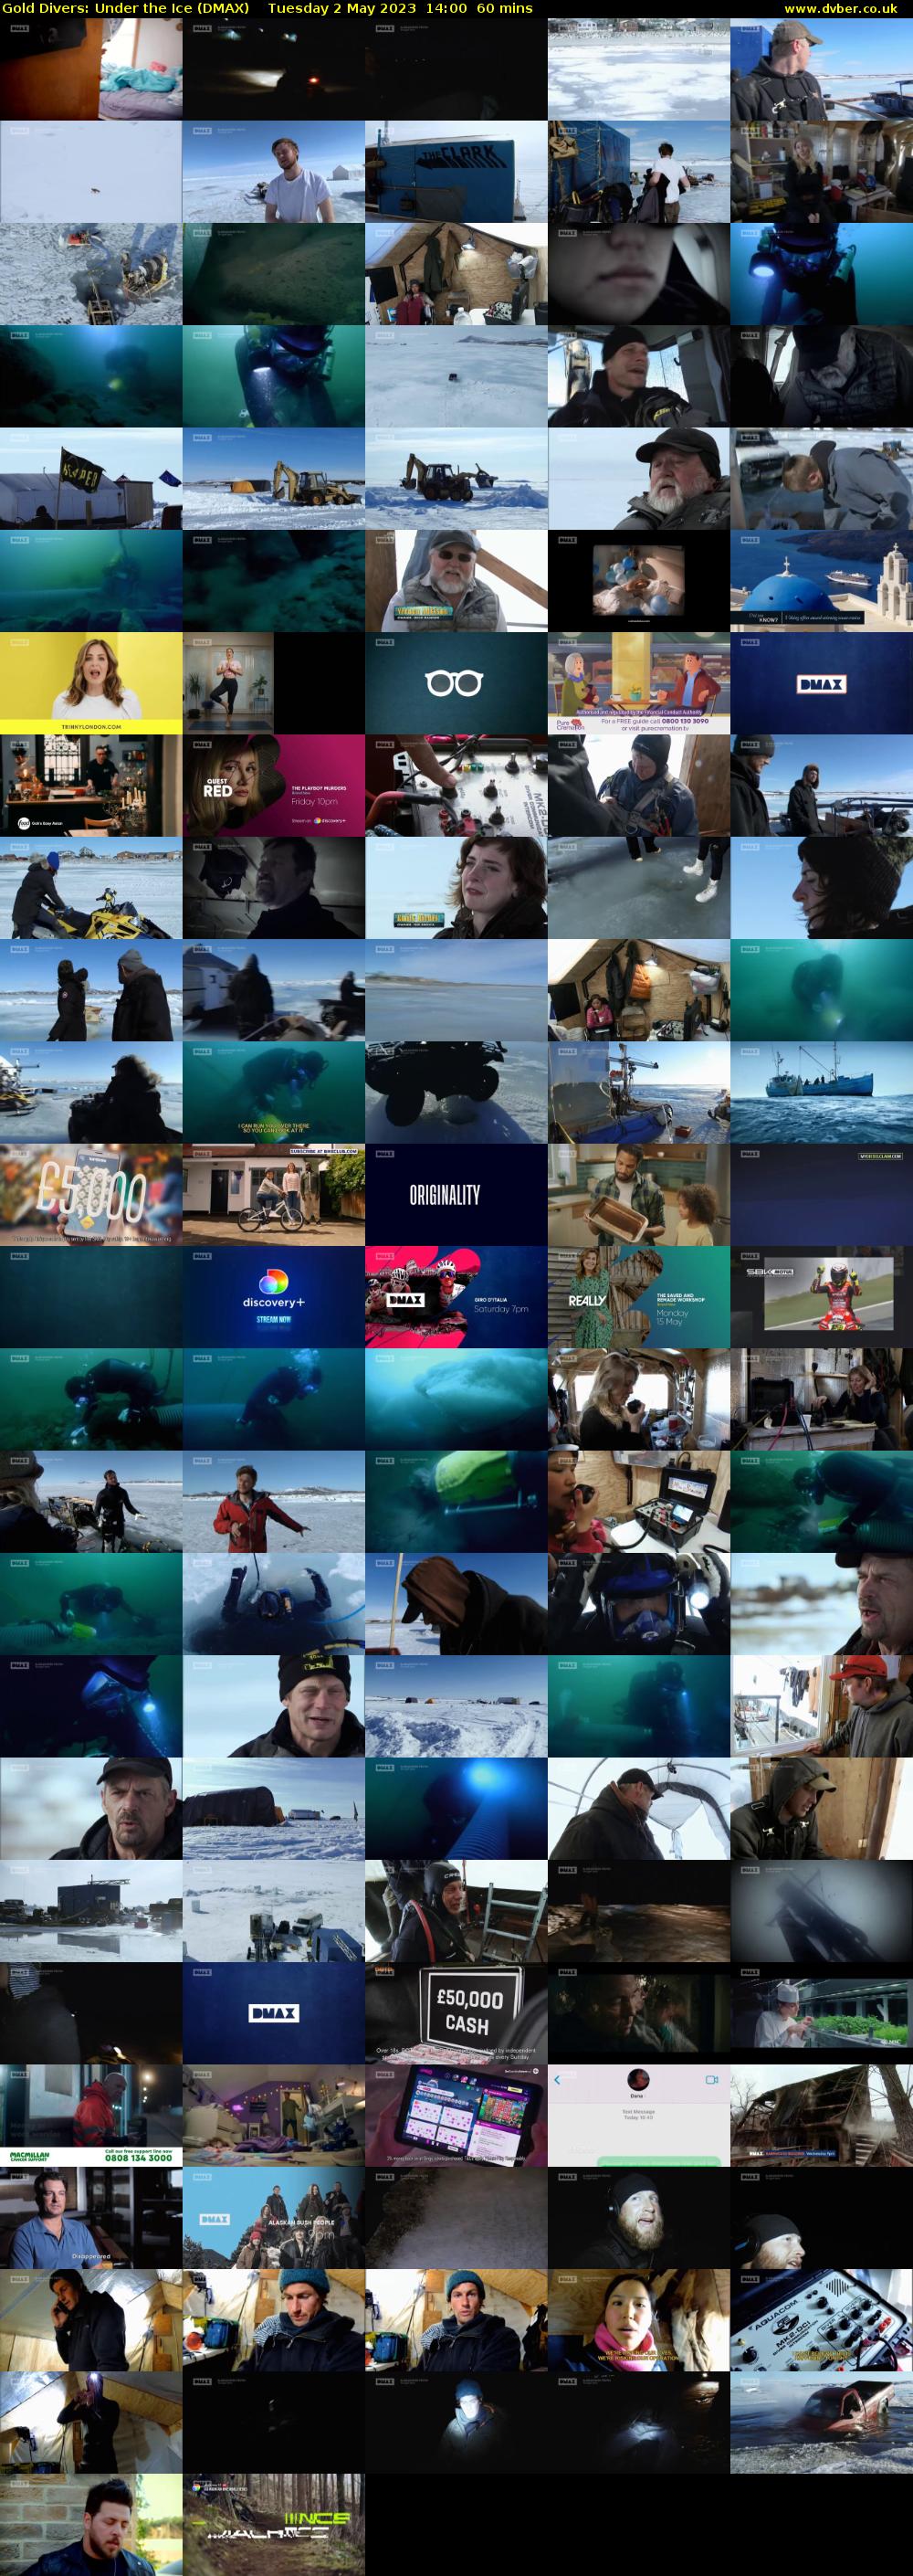 Gold Divers: Under the Ice (DMAX) Tuesday 2 May 2023 14:00 - 15:00